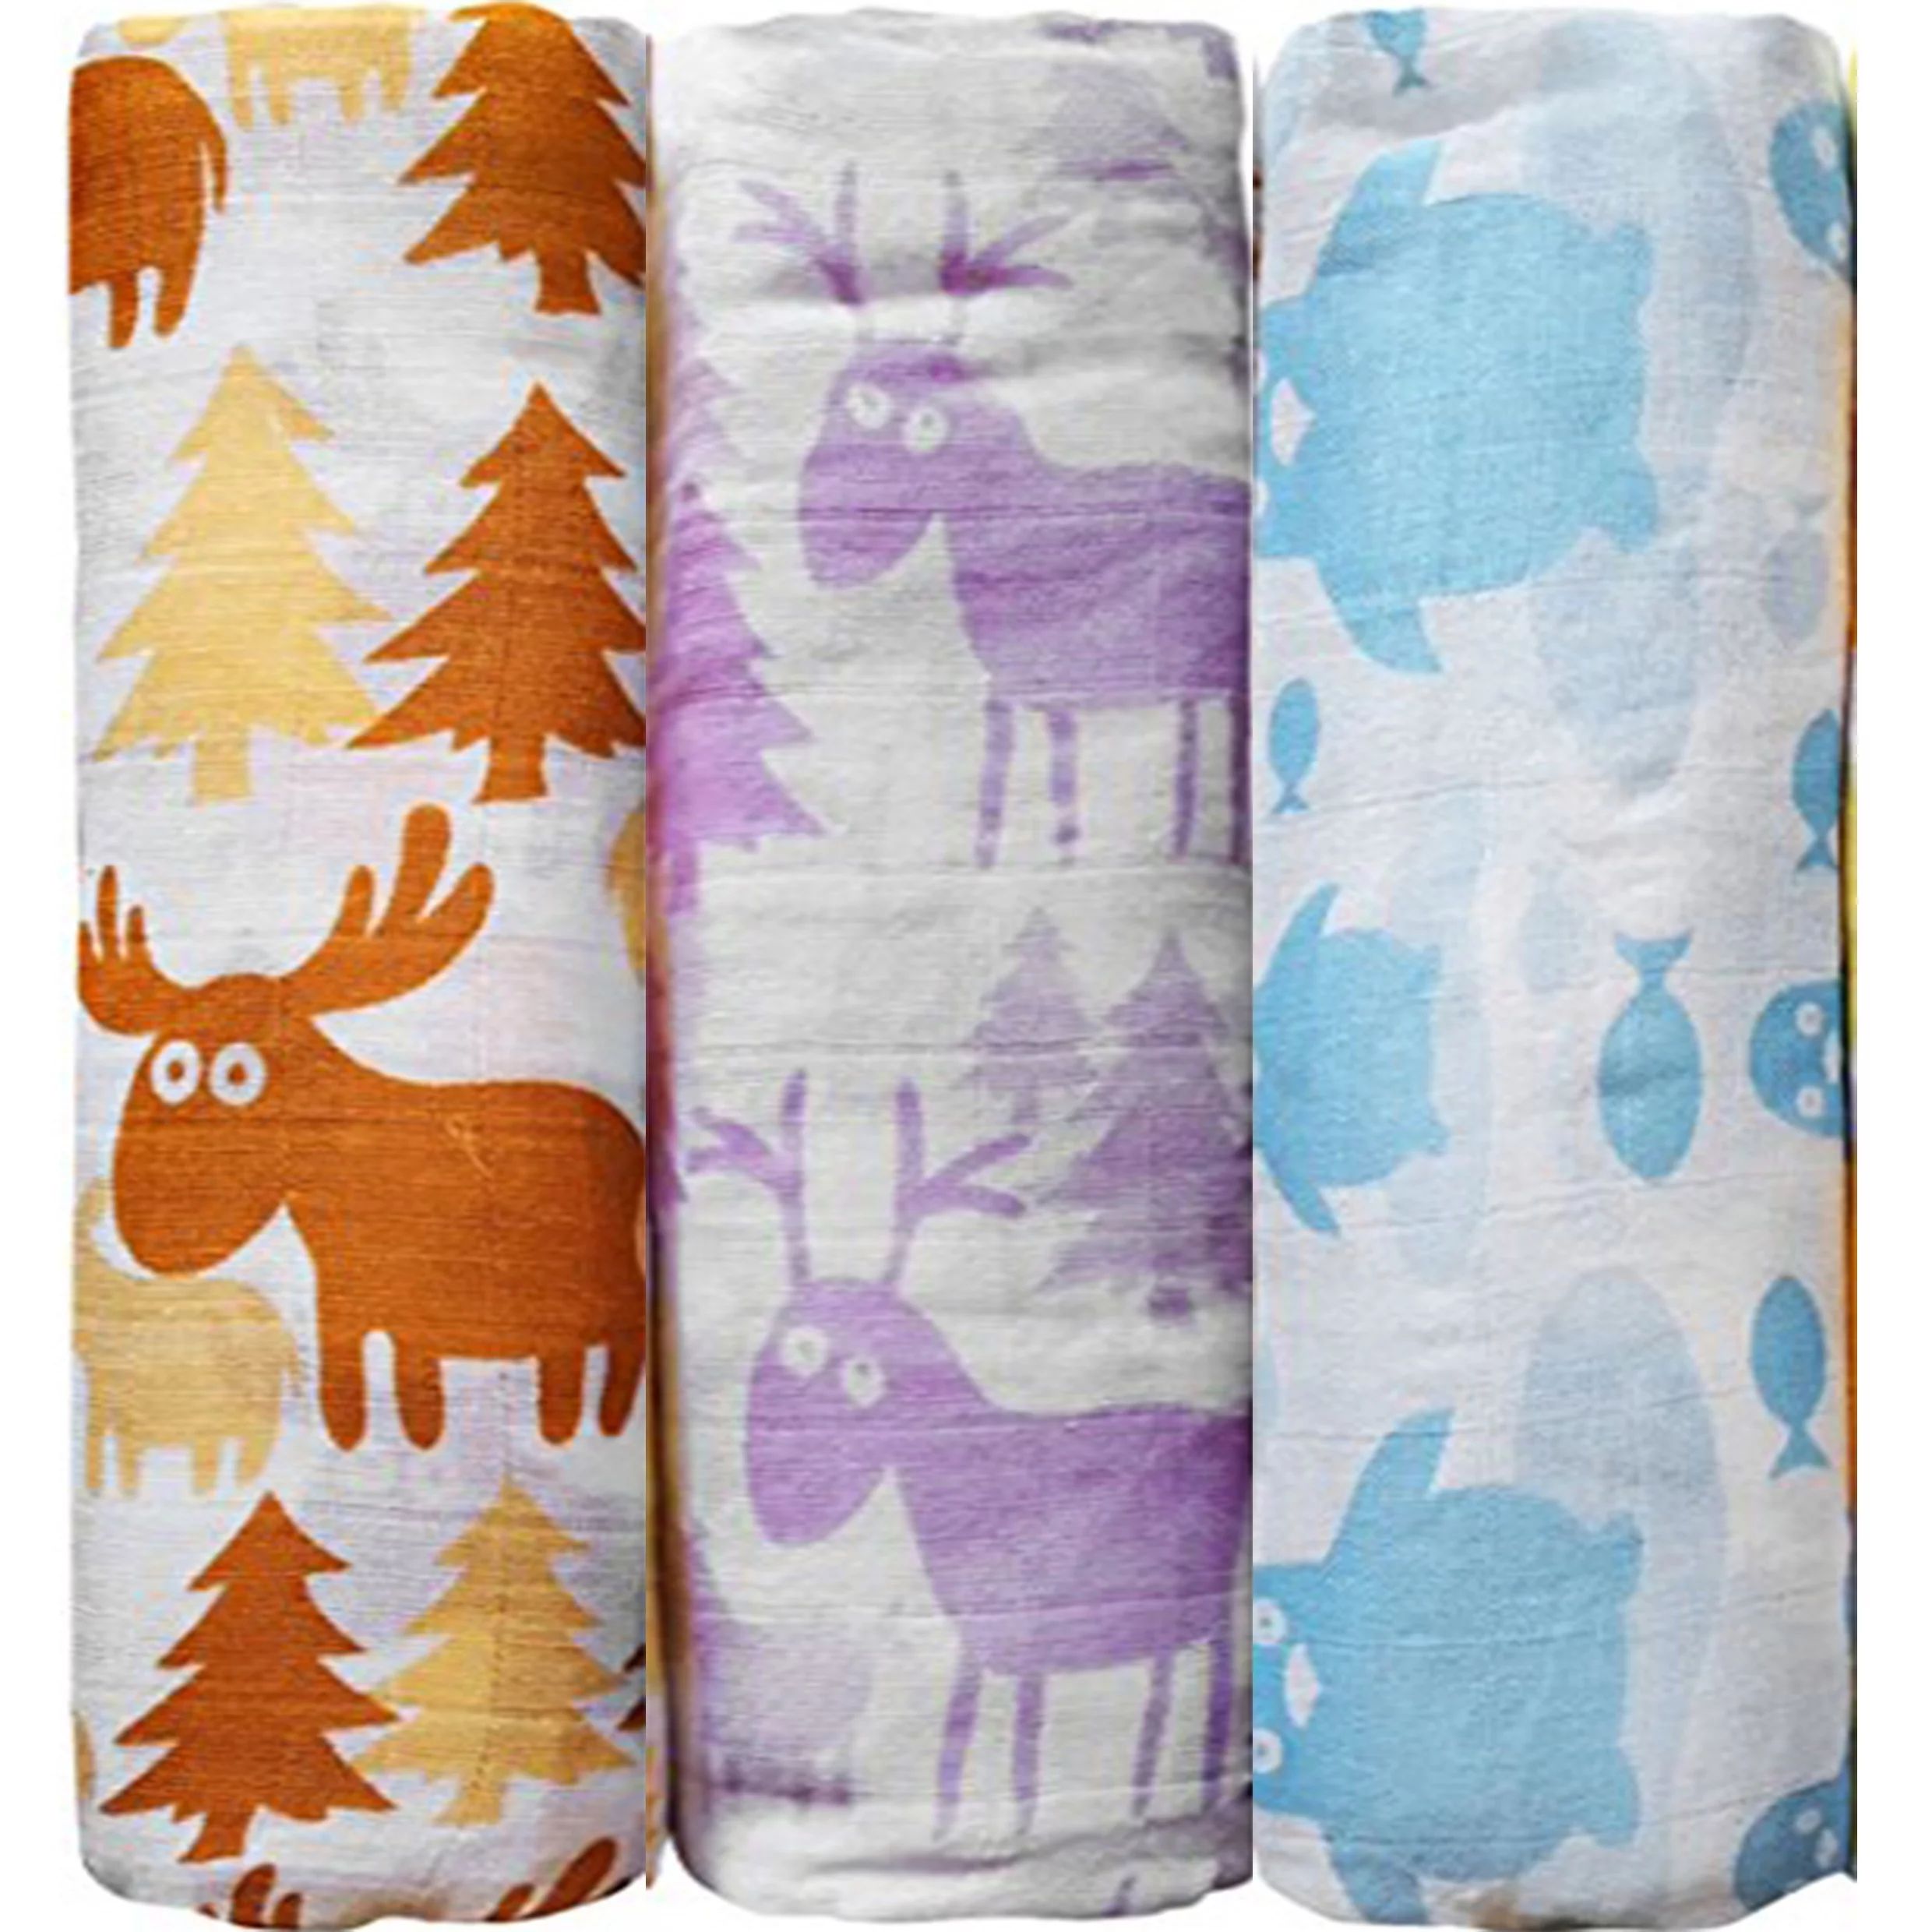 Muslin Swaddle Blanket 3 Pack - 47"x47" - Cute Animals - Unisex for Boys and Girls | Walmart (US)